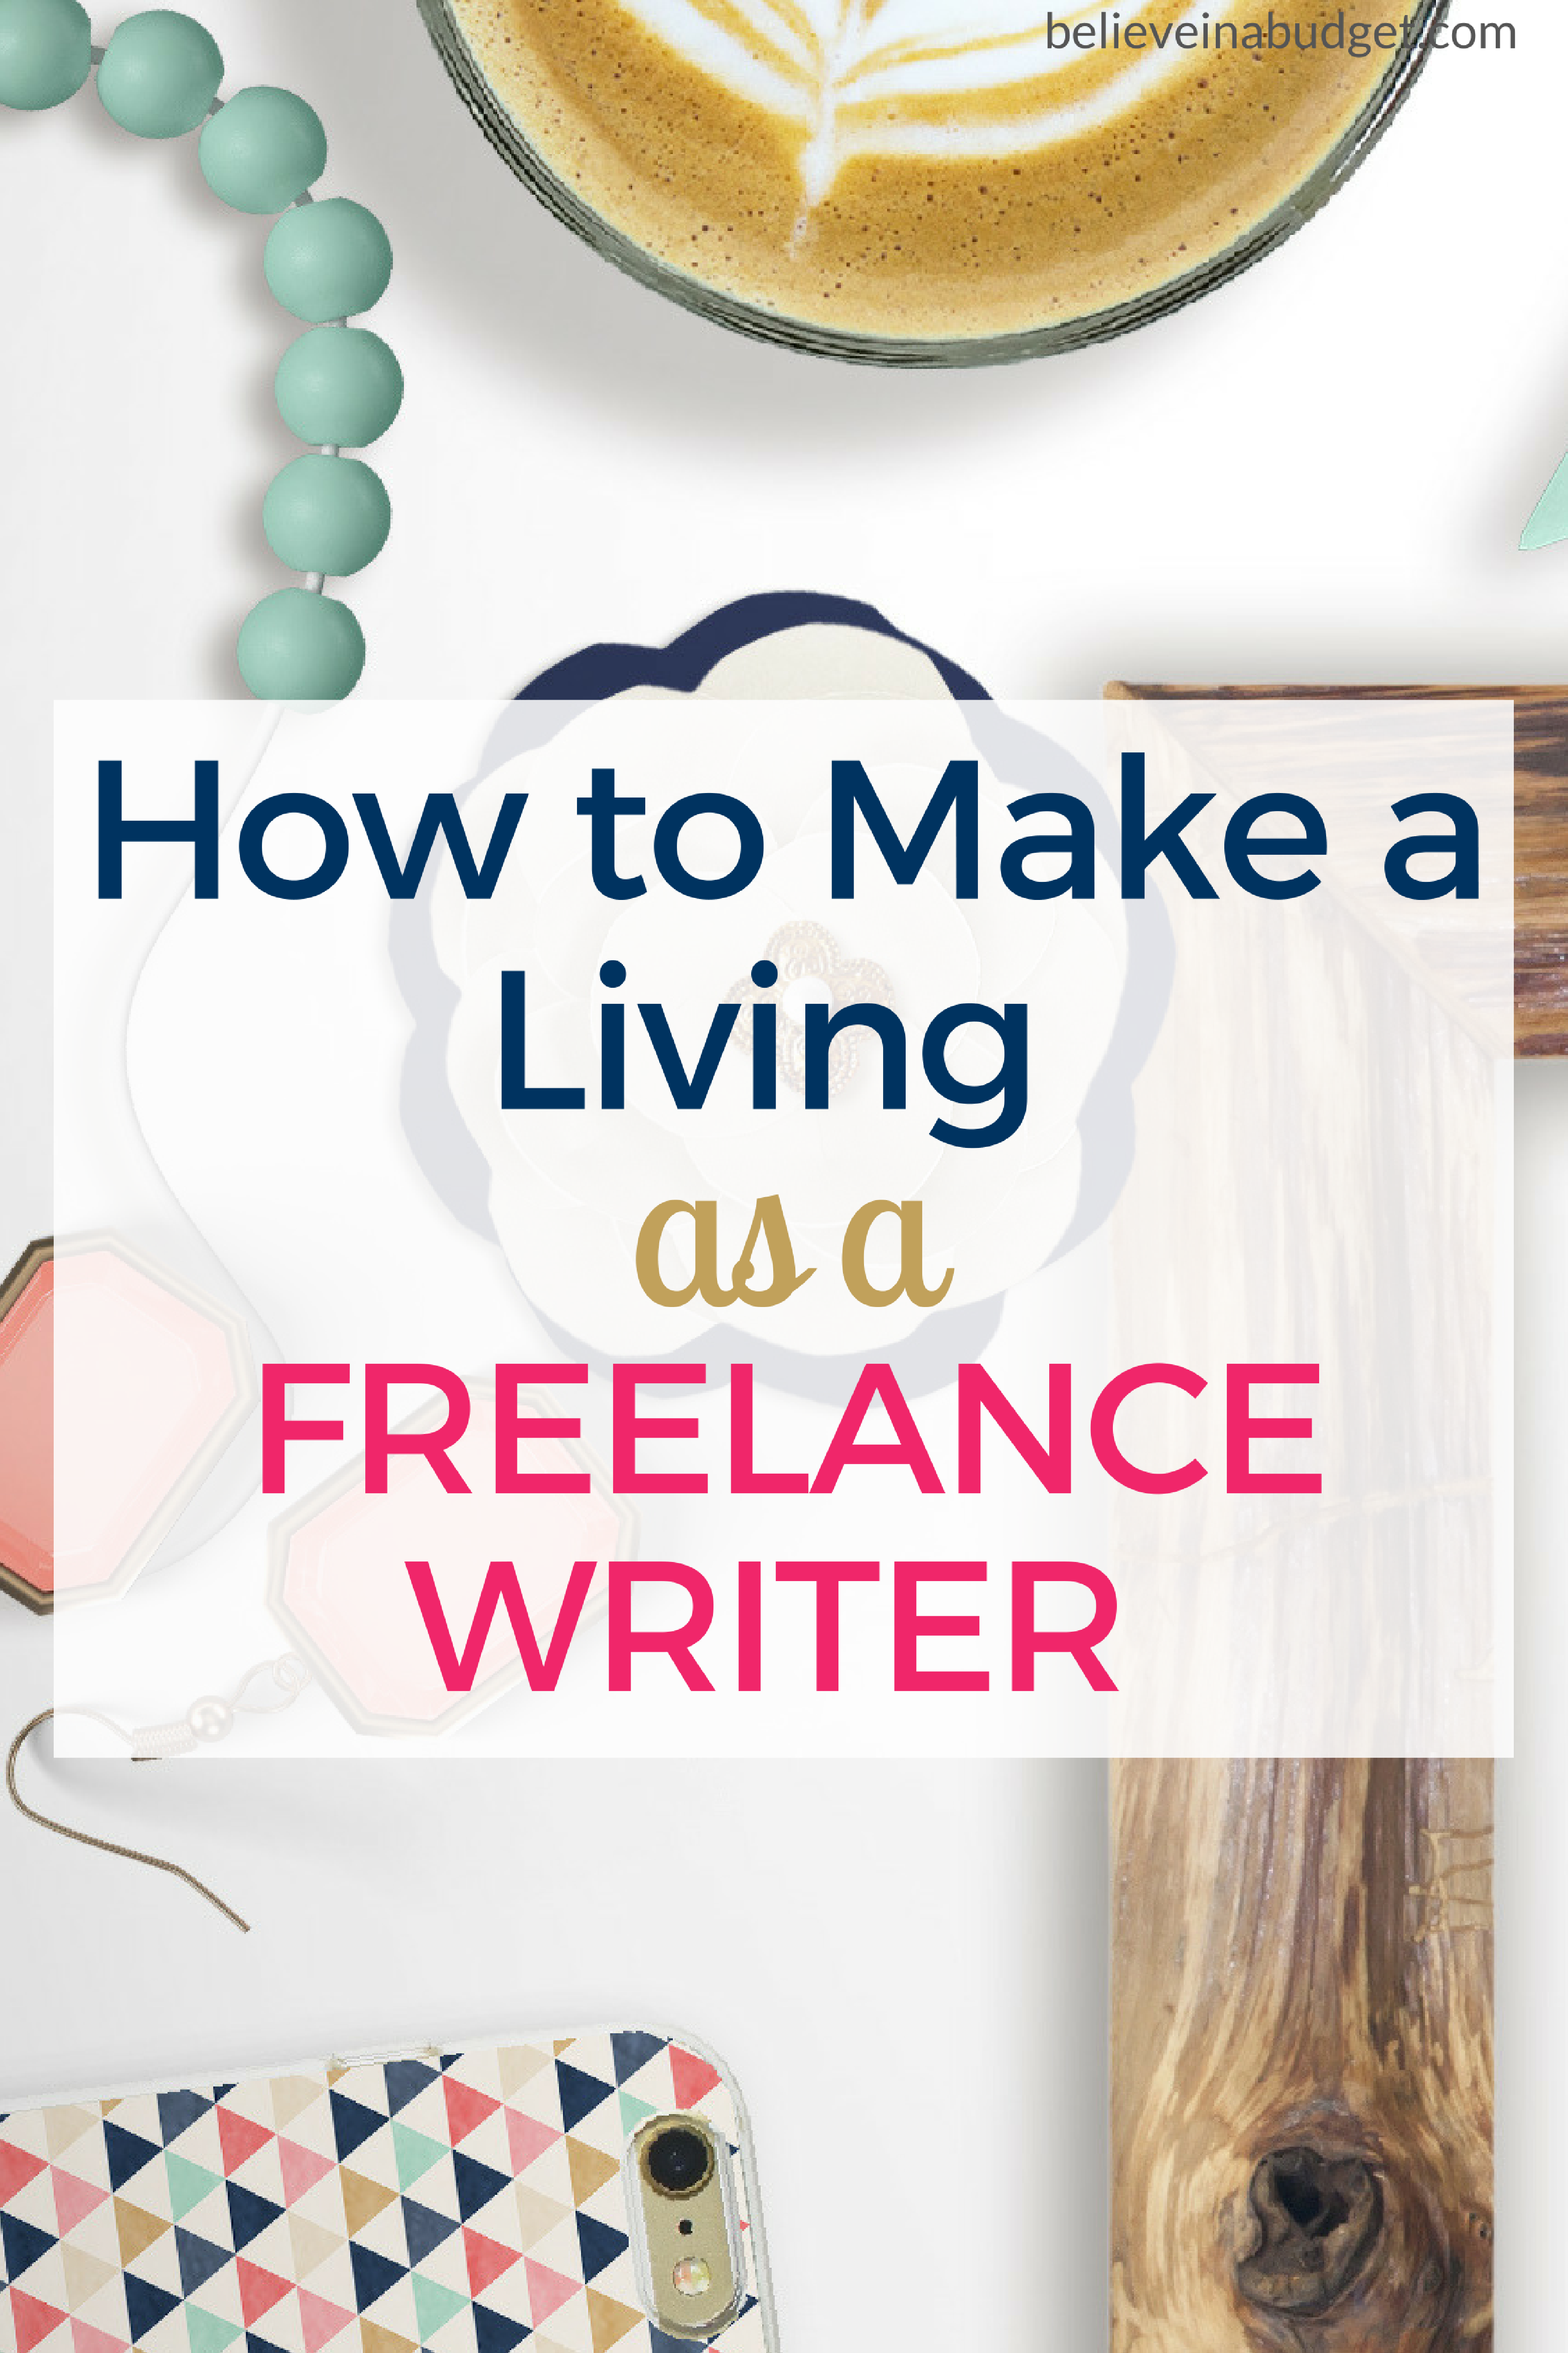 One of the best side hustles is freelance writing. You can earn unlimited income as a writer. If you want to make more money, here is what you can do to get started as a freelance writer in thirty days or less!